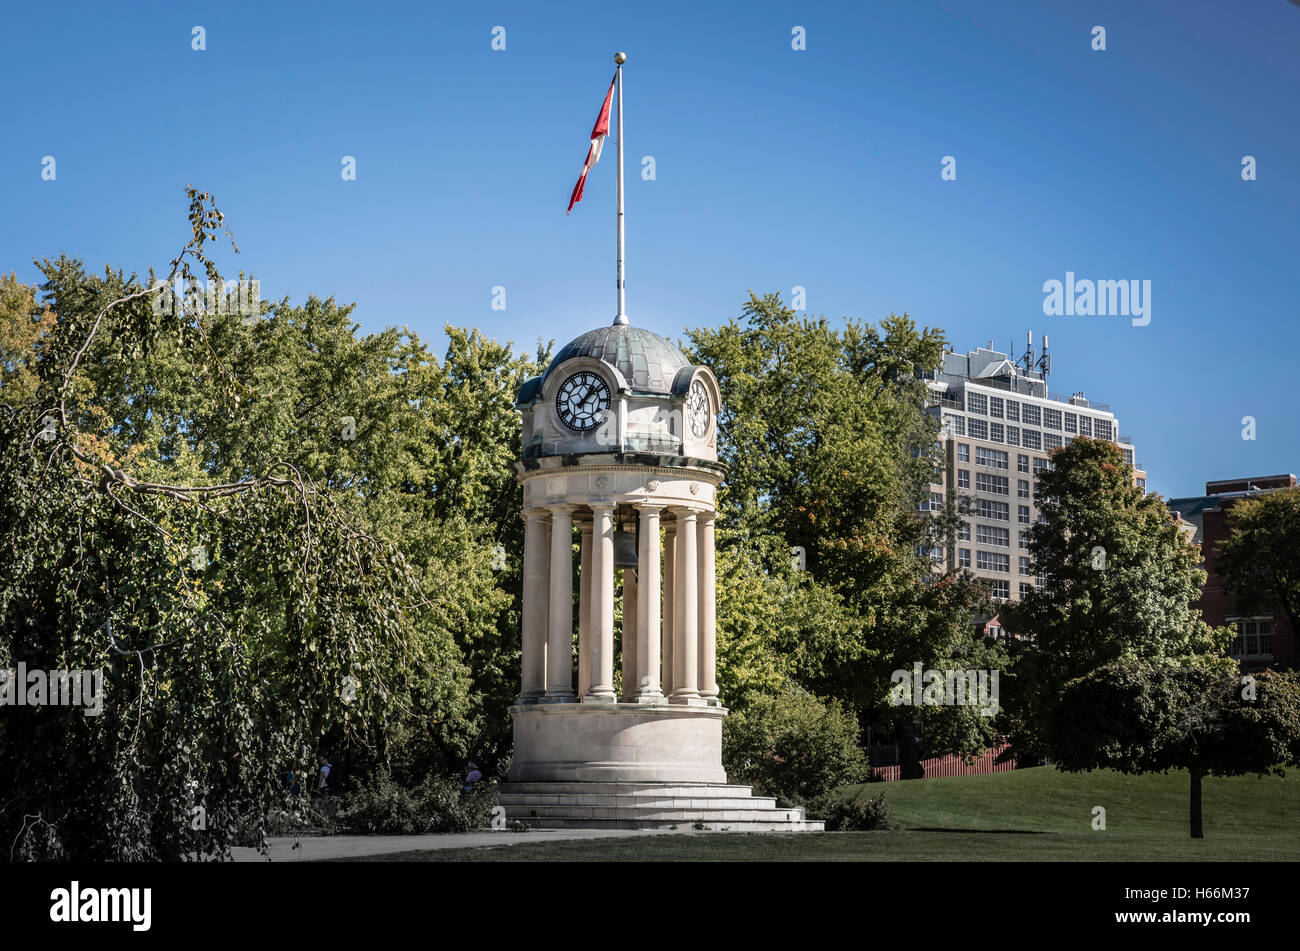 Clock tower in Victoria Park, Kitchener Canada Stock Photo